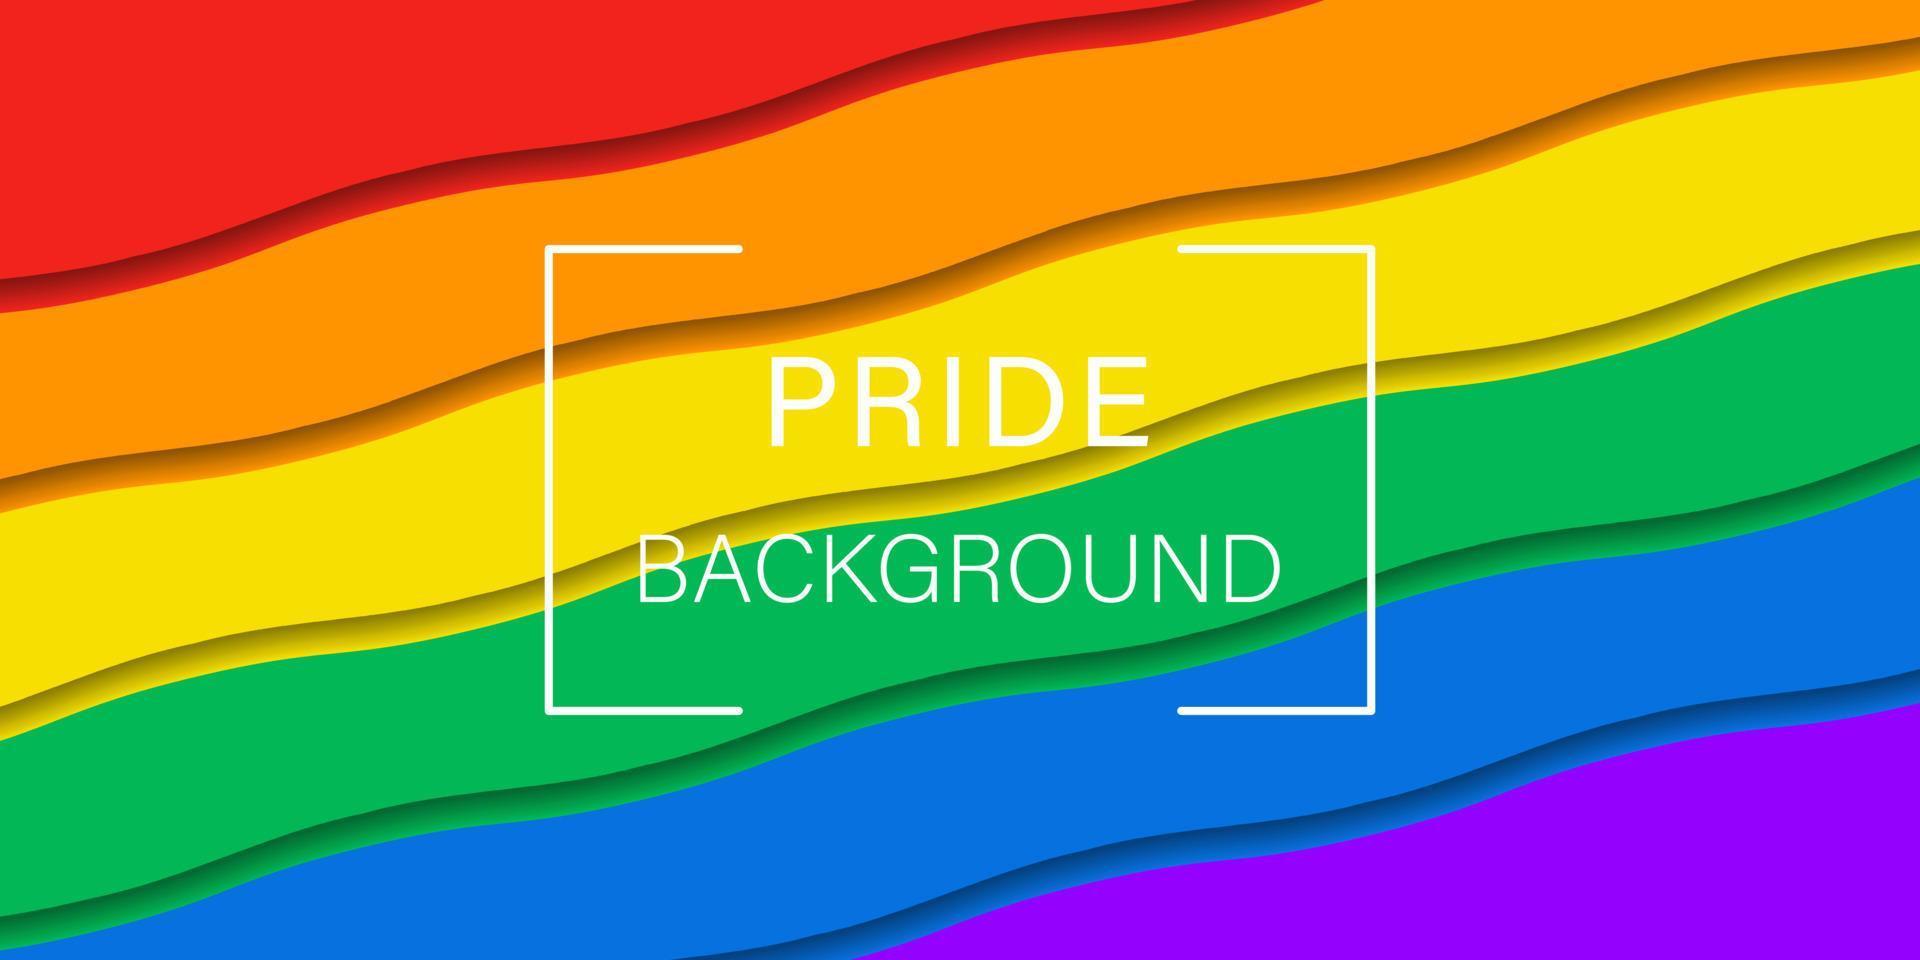 Color Waved Flag Symbol of Lgbt Community. Rainbow Background Sign of Lgbtq, Homosexual, Transgender, Bisexual, Gay and Lesbian. Sign of Pride. Vector Illustration.